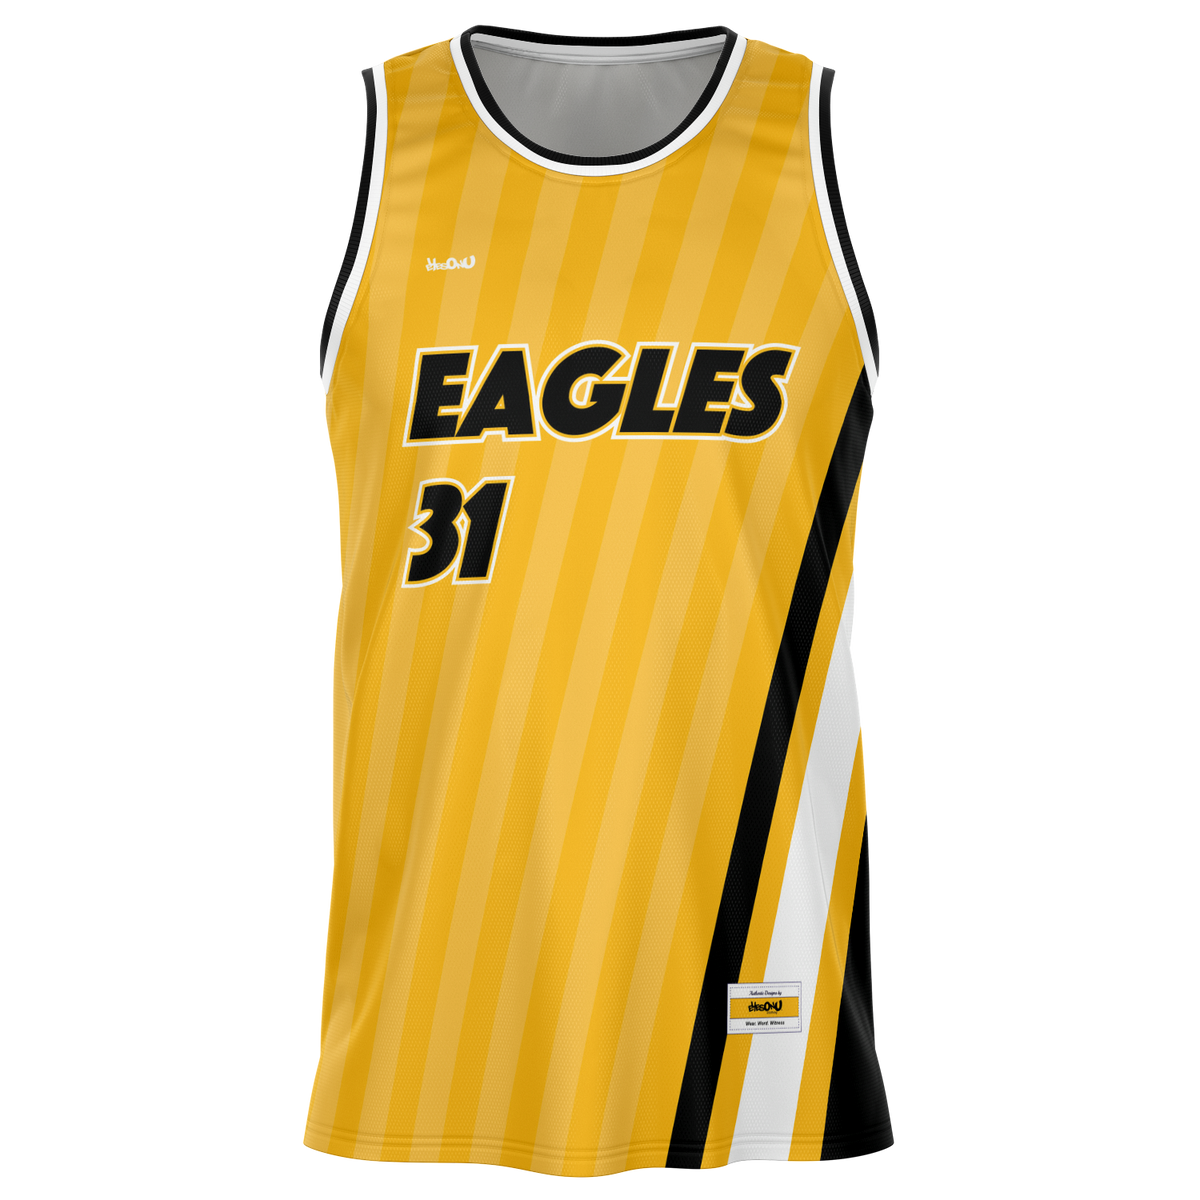 EOYC Eagles - Basketball Jersey – Eyes On You Clothing